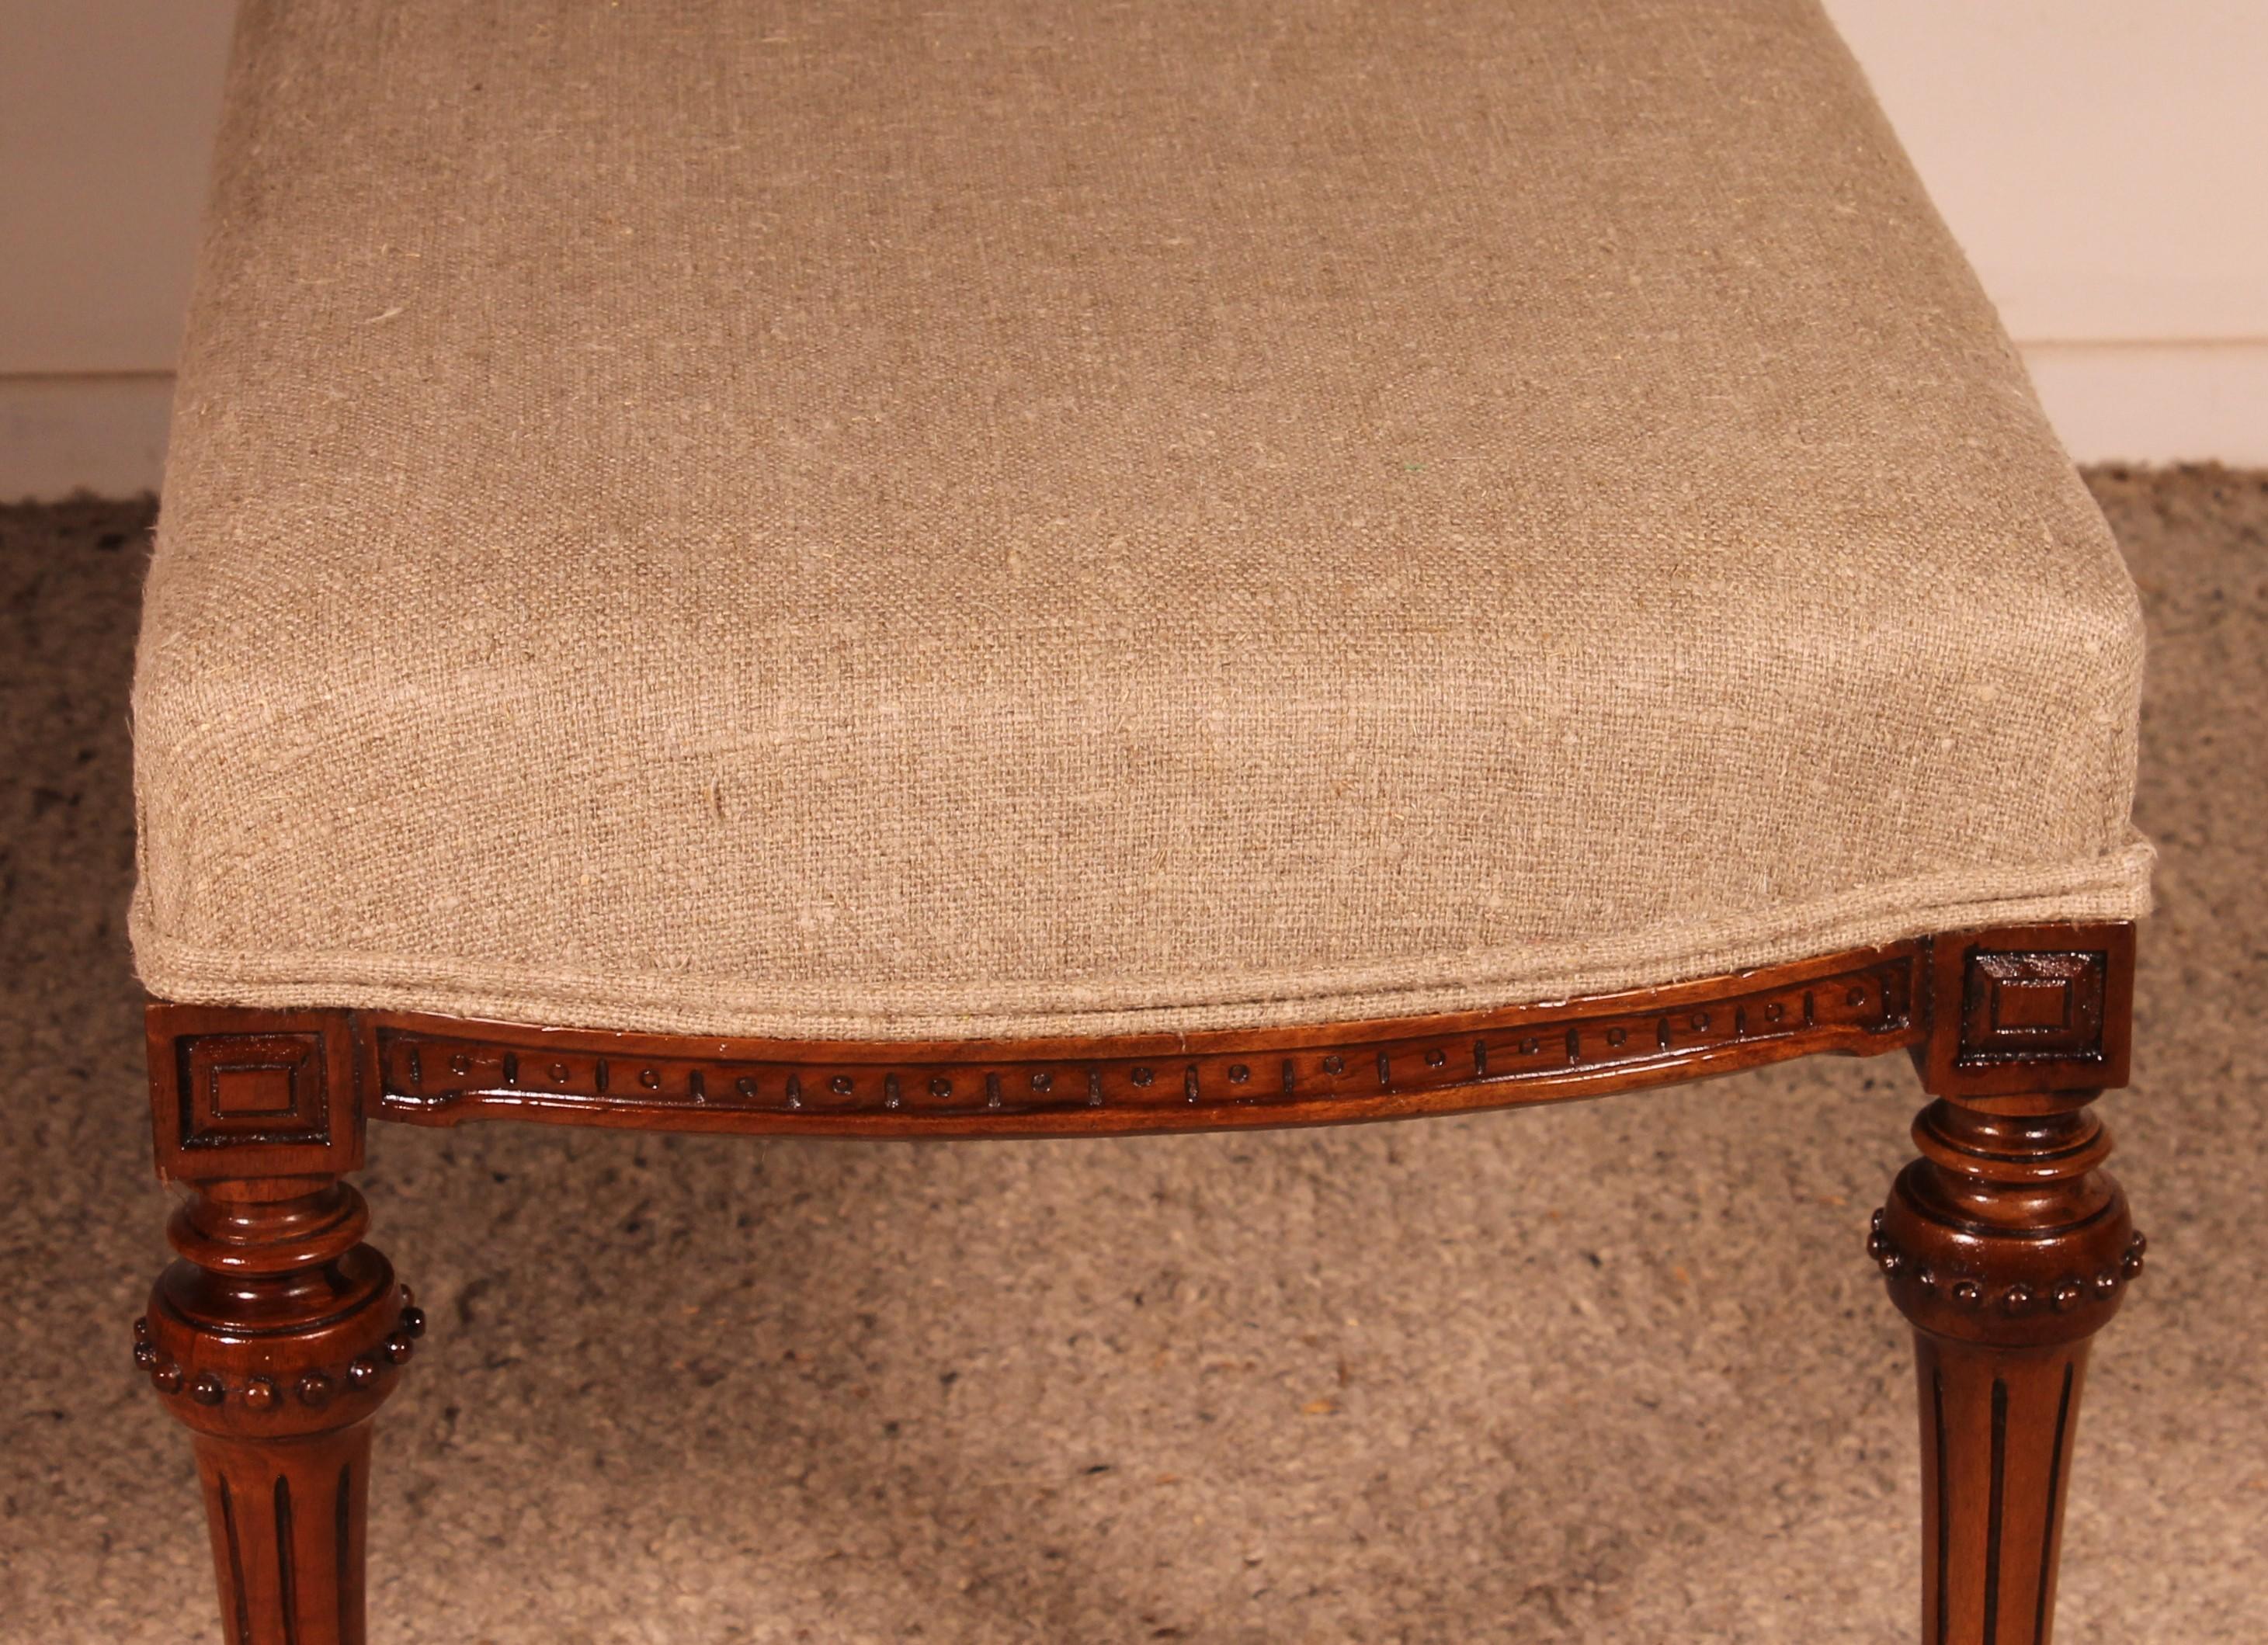 Mahogany Bench From The 19th Century Covered With A Linen Fabric 3